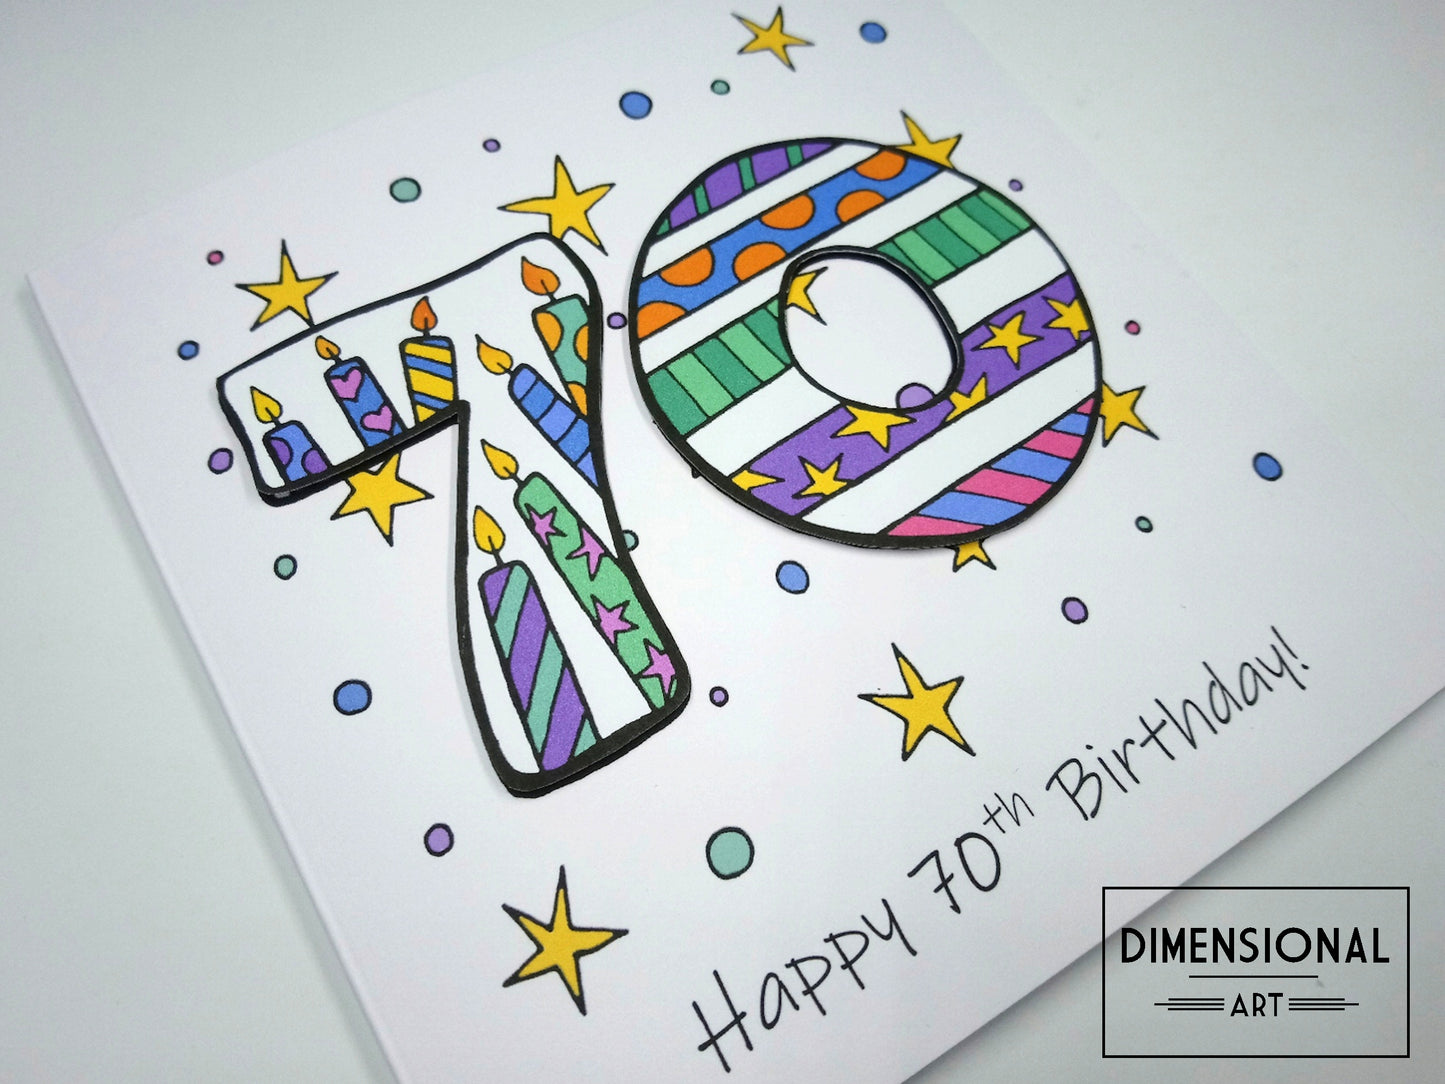 70th Number Candles Birthday Card